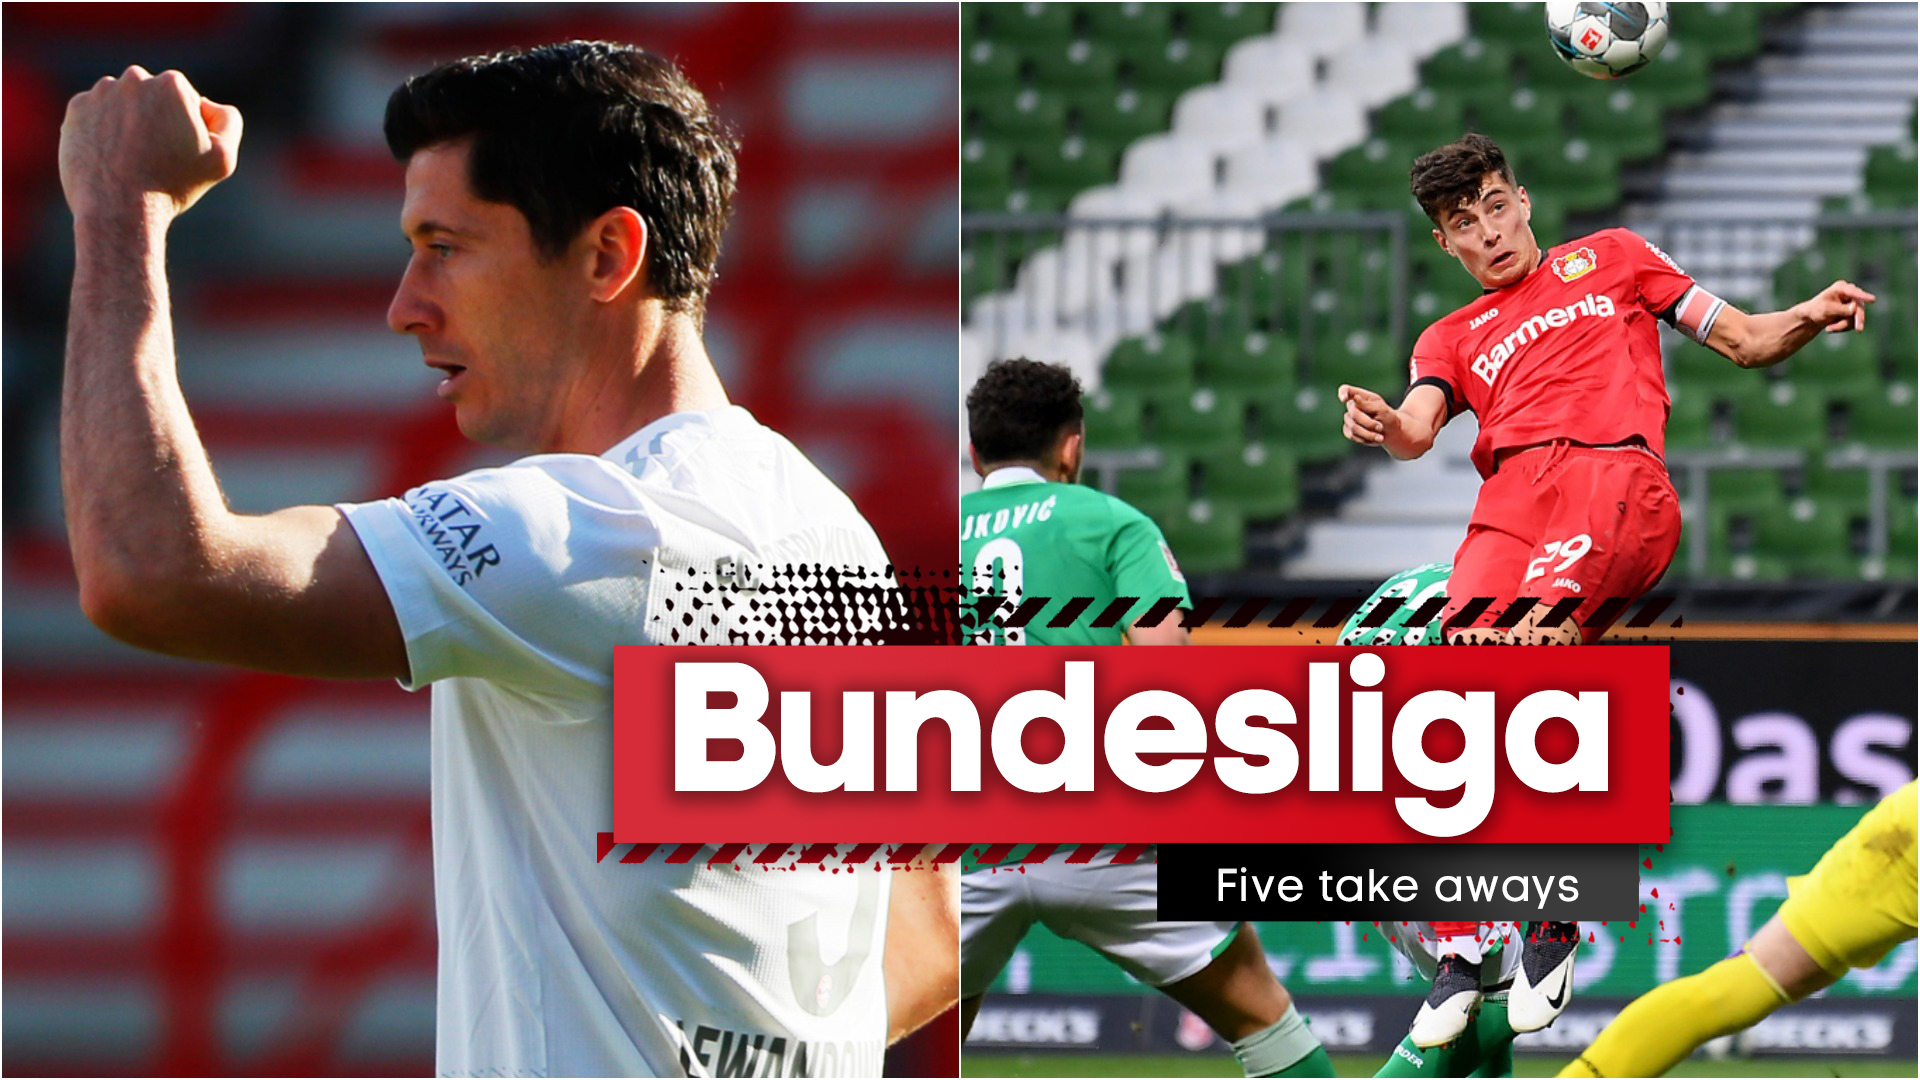 Football Critic's Paul Macdonald runs through key stats and findings from the Bundesliga's return to action